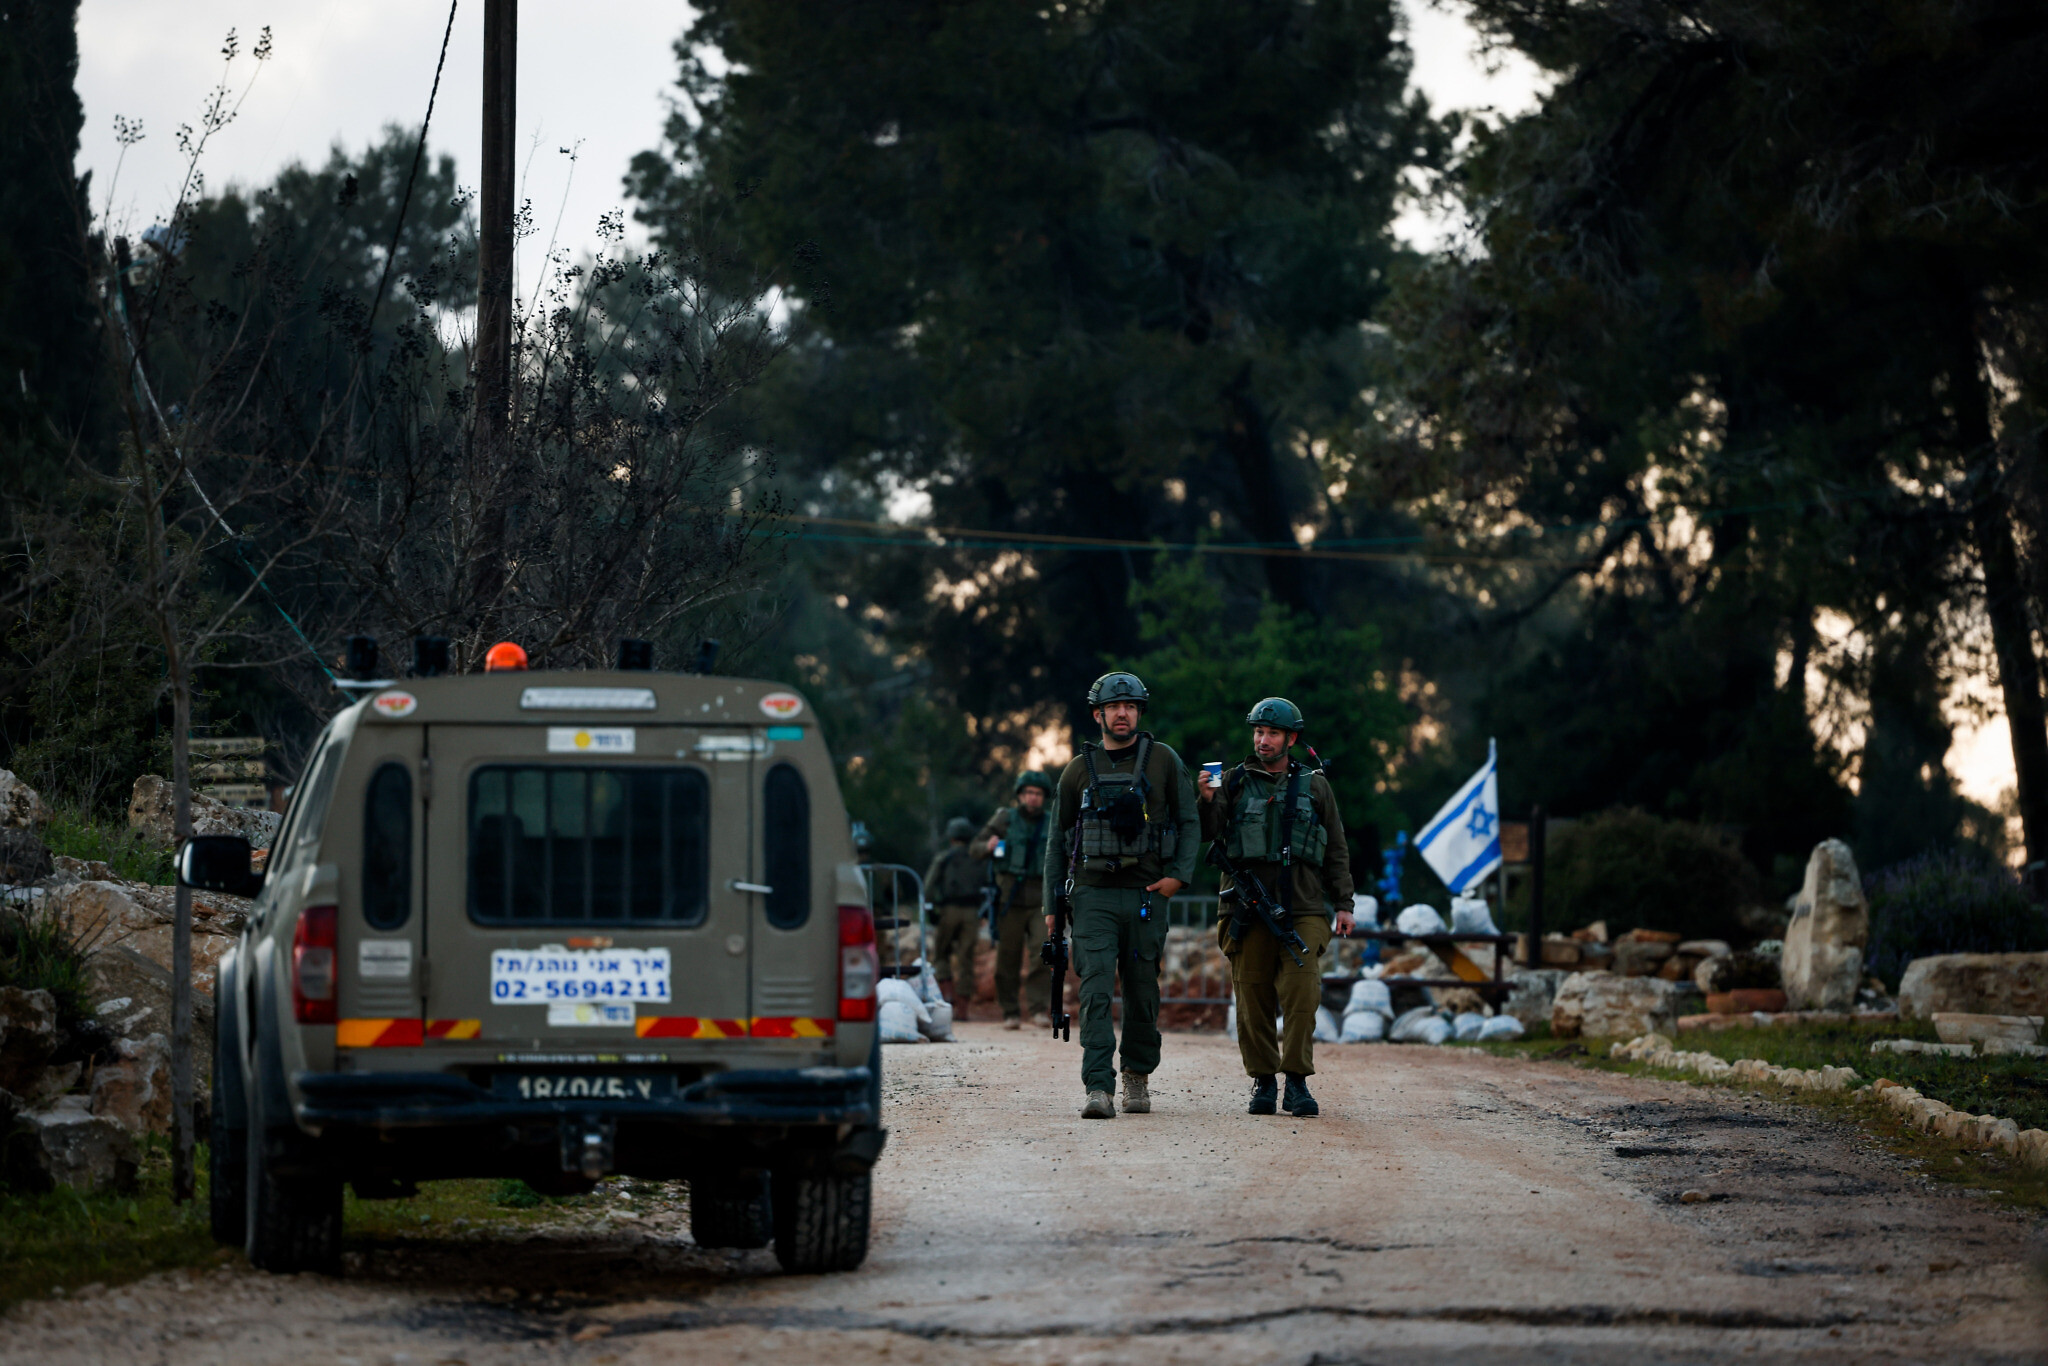 Two Shin Bet officers hurt